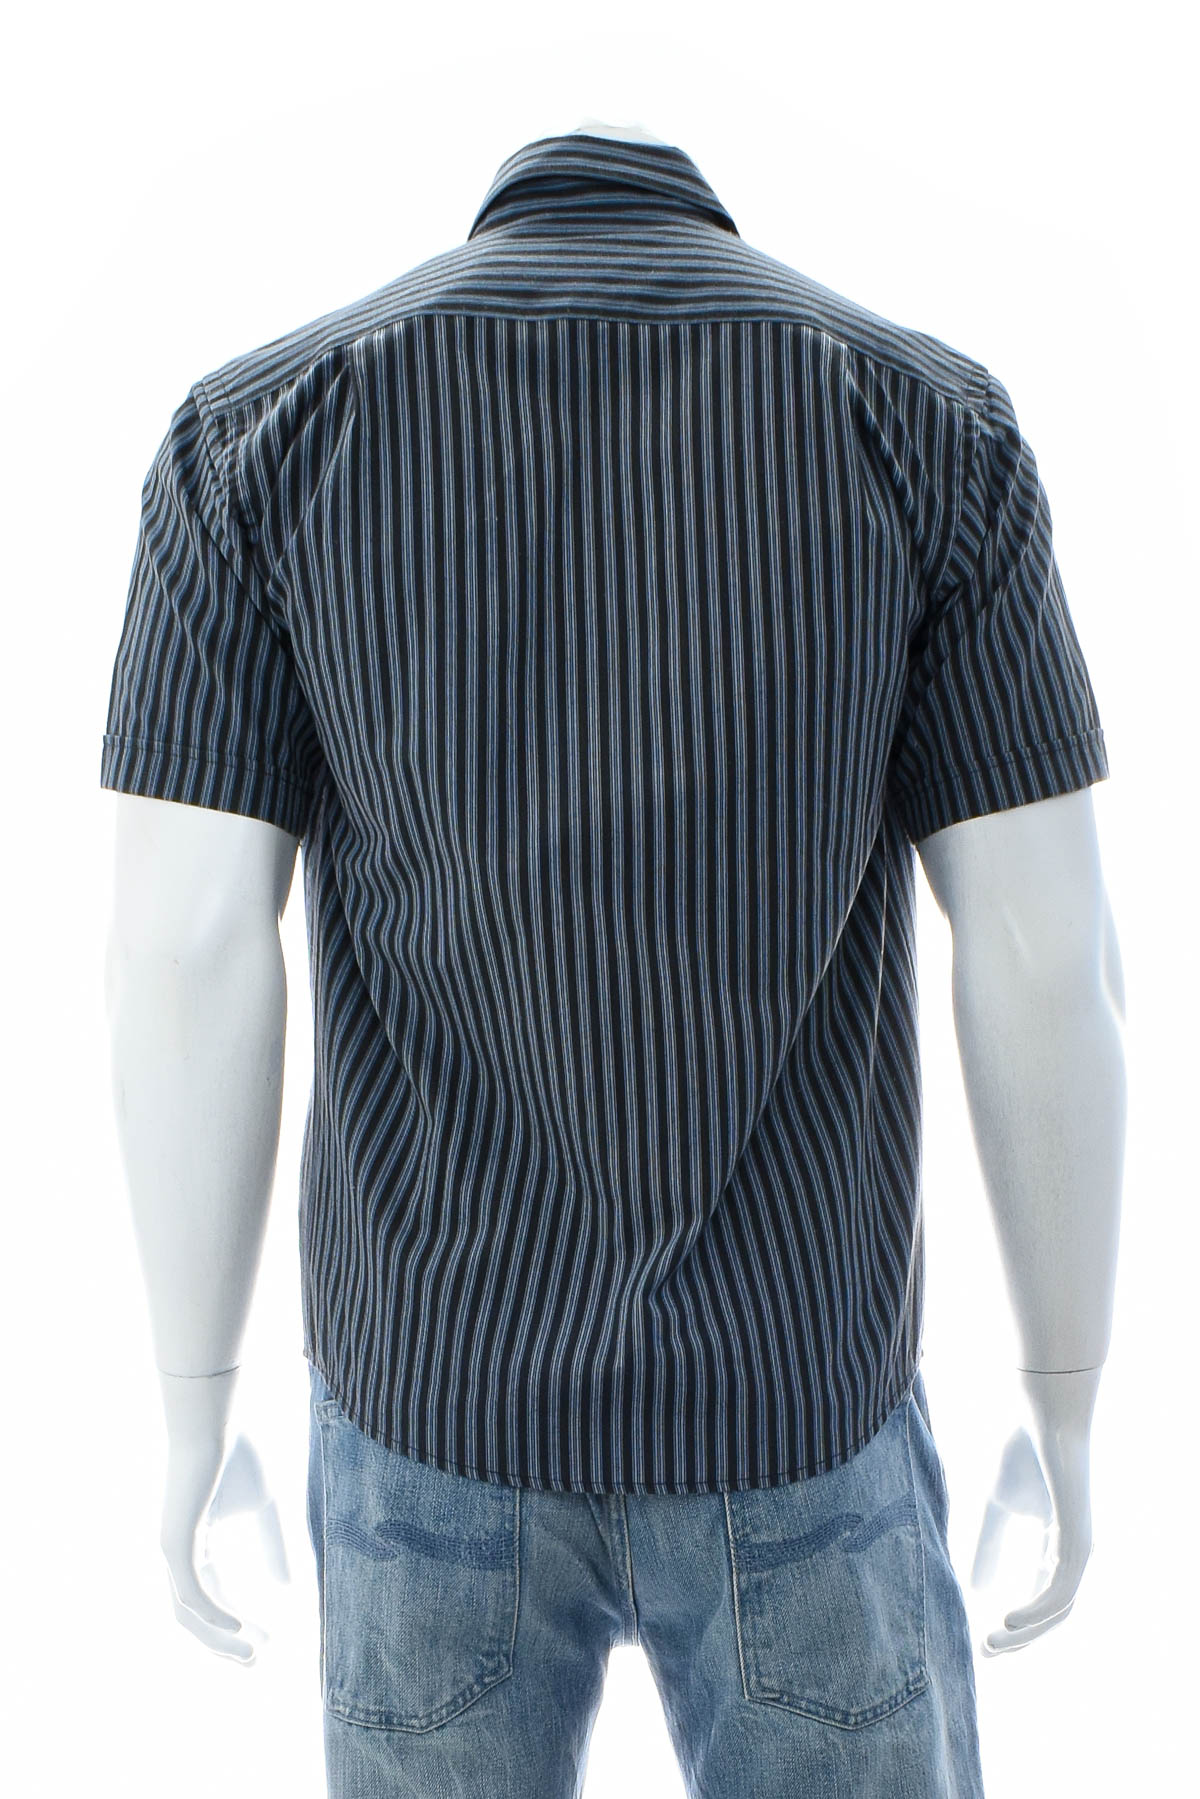 Men's shirt - Fashion Collection Y7 - 1